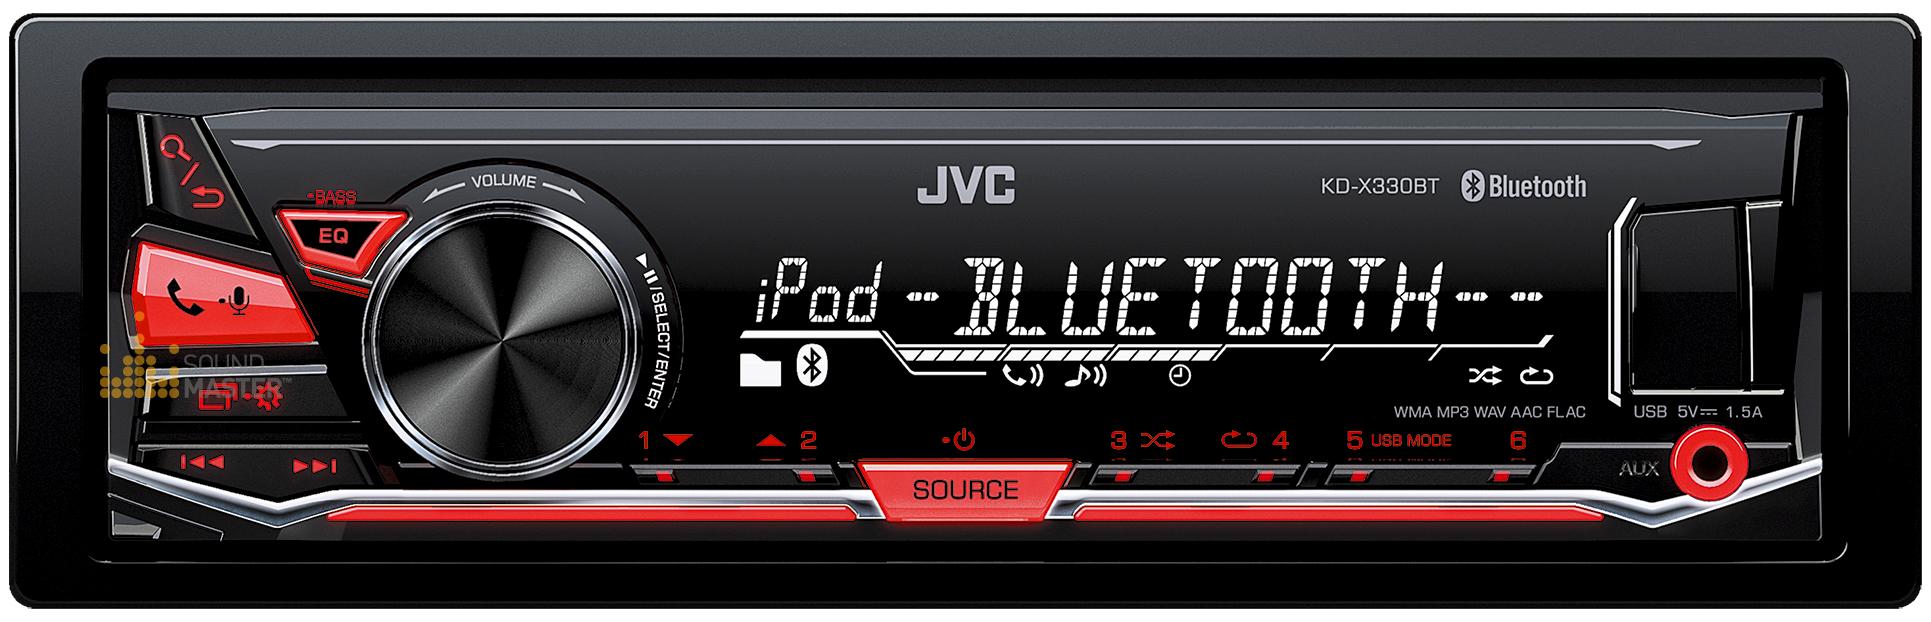 Leven van verontreiniging zo 129) JVC KD-X330BT Player with Bluetooth USB iPod and Android Support -  KDX330BT